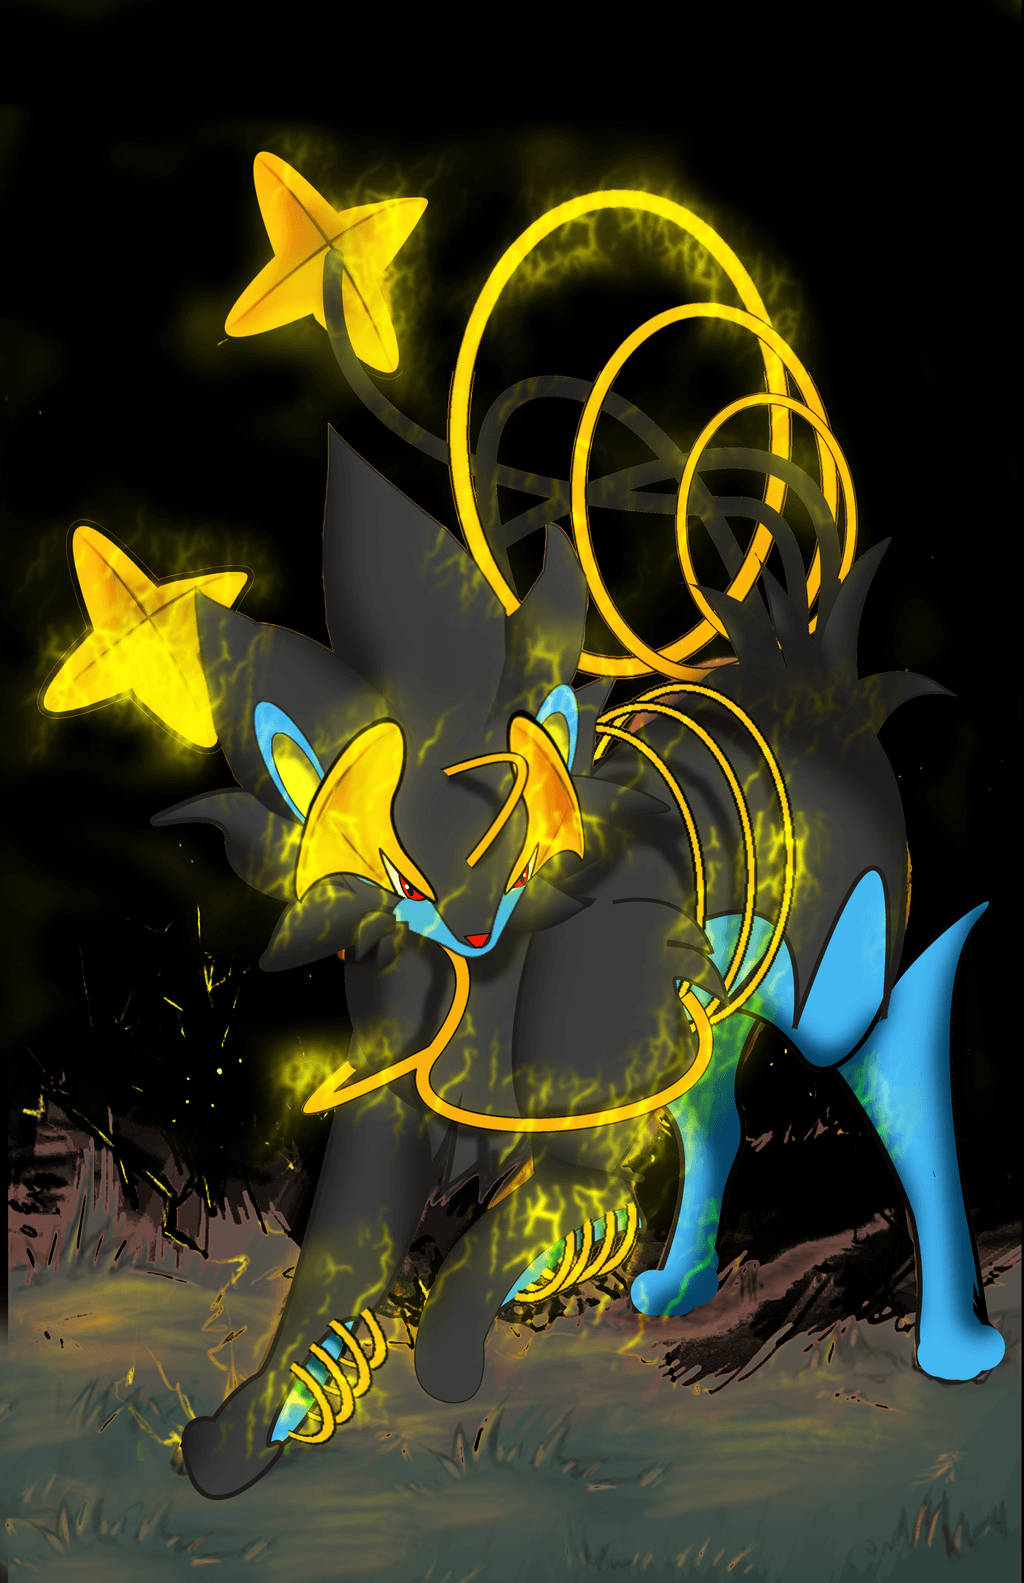 Shinx evolves into Luxray in a state of confusion. Wallpaper